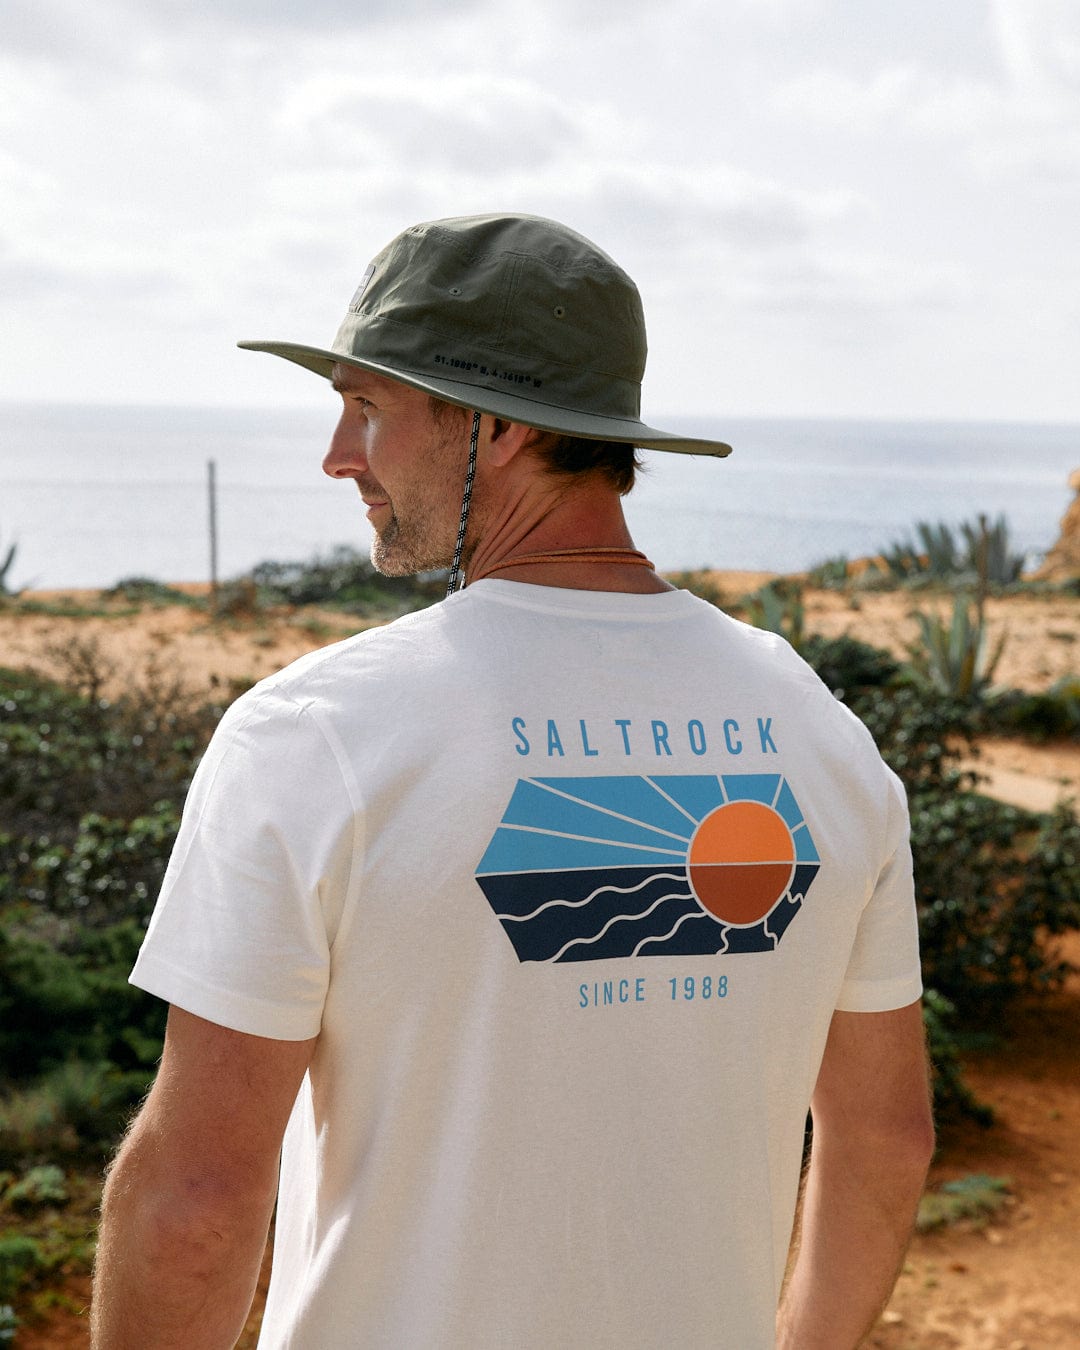 A man wearing a Saltrock Vantage Colour - Mens Short Sleeve T-Shirt in White and hat, gazing at the ocean.